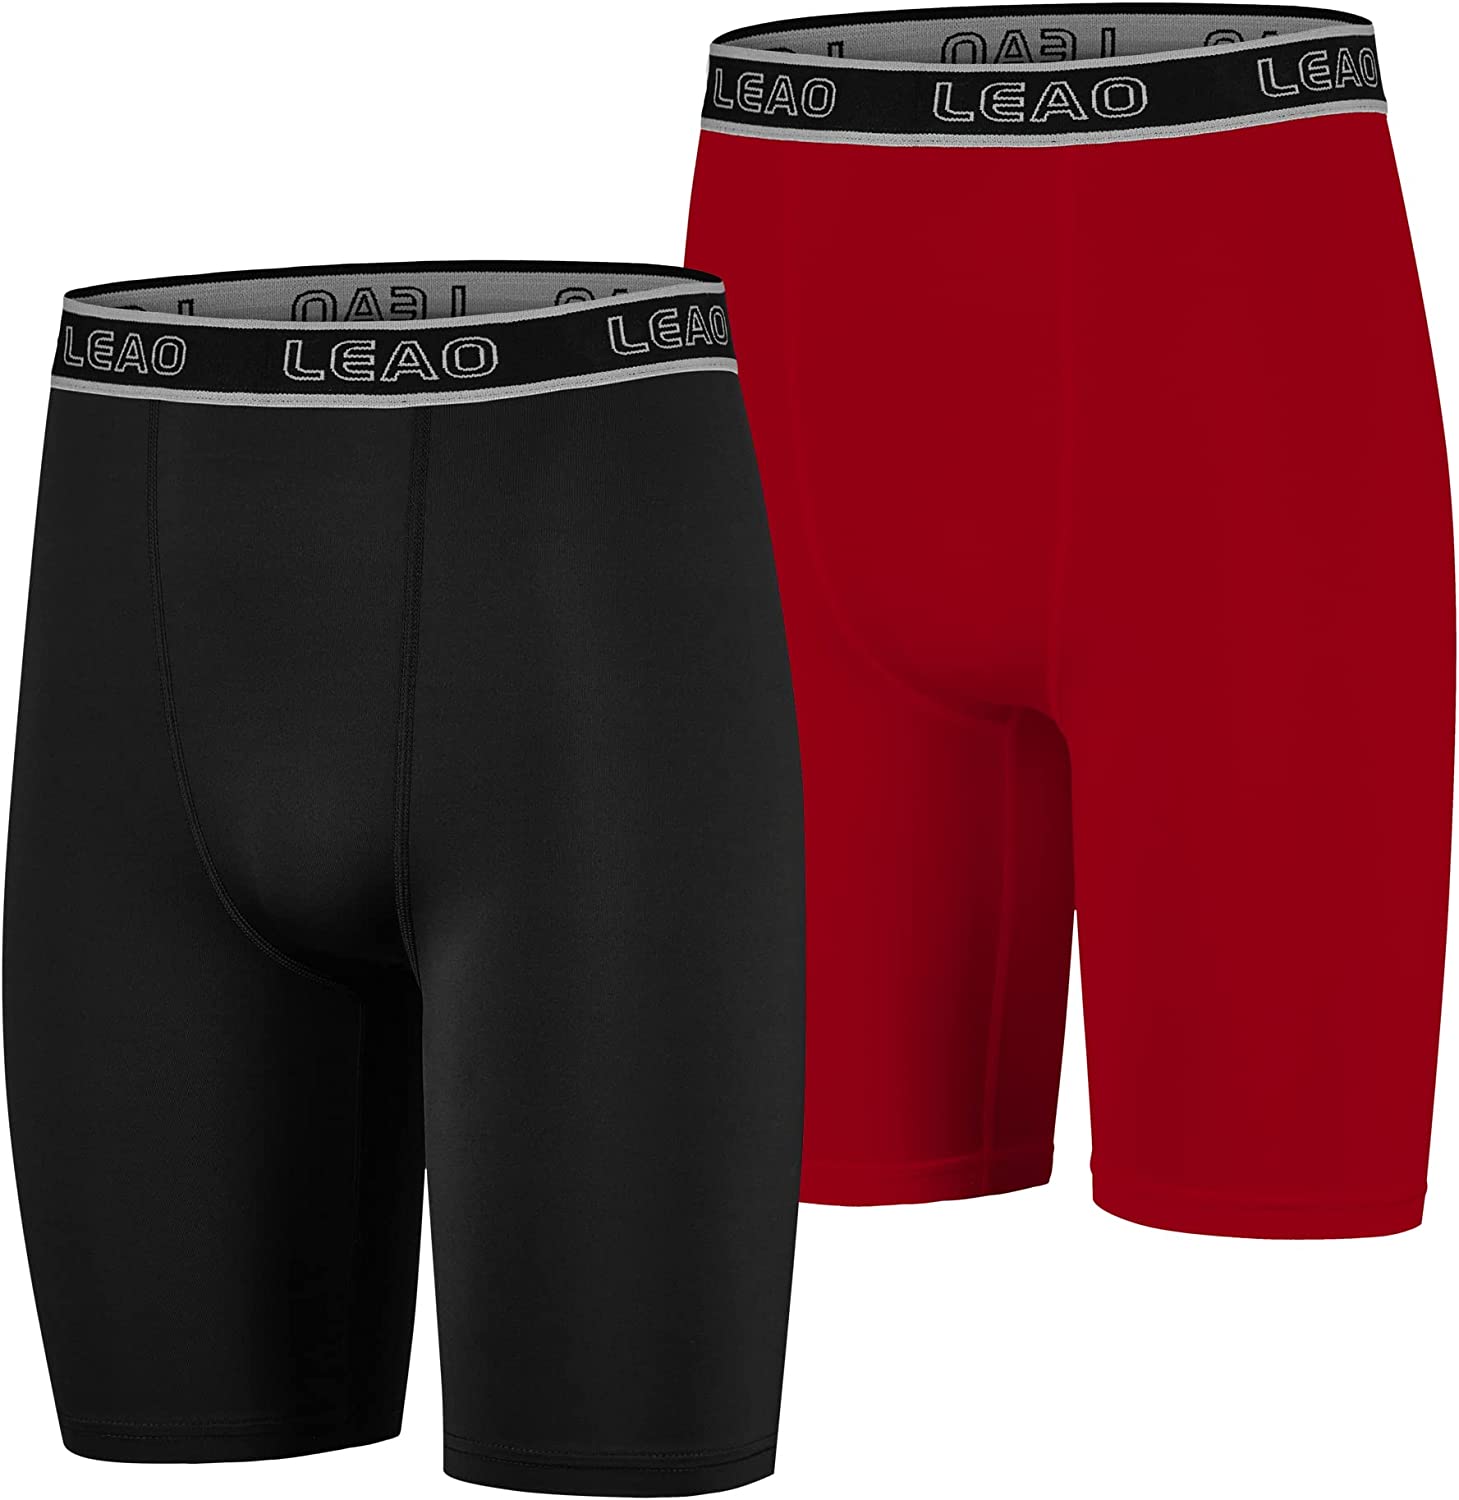 LEAO Youth Boys Compression Shorts 2-pack Performance Athletic